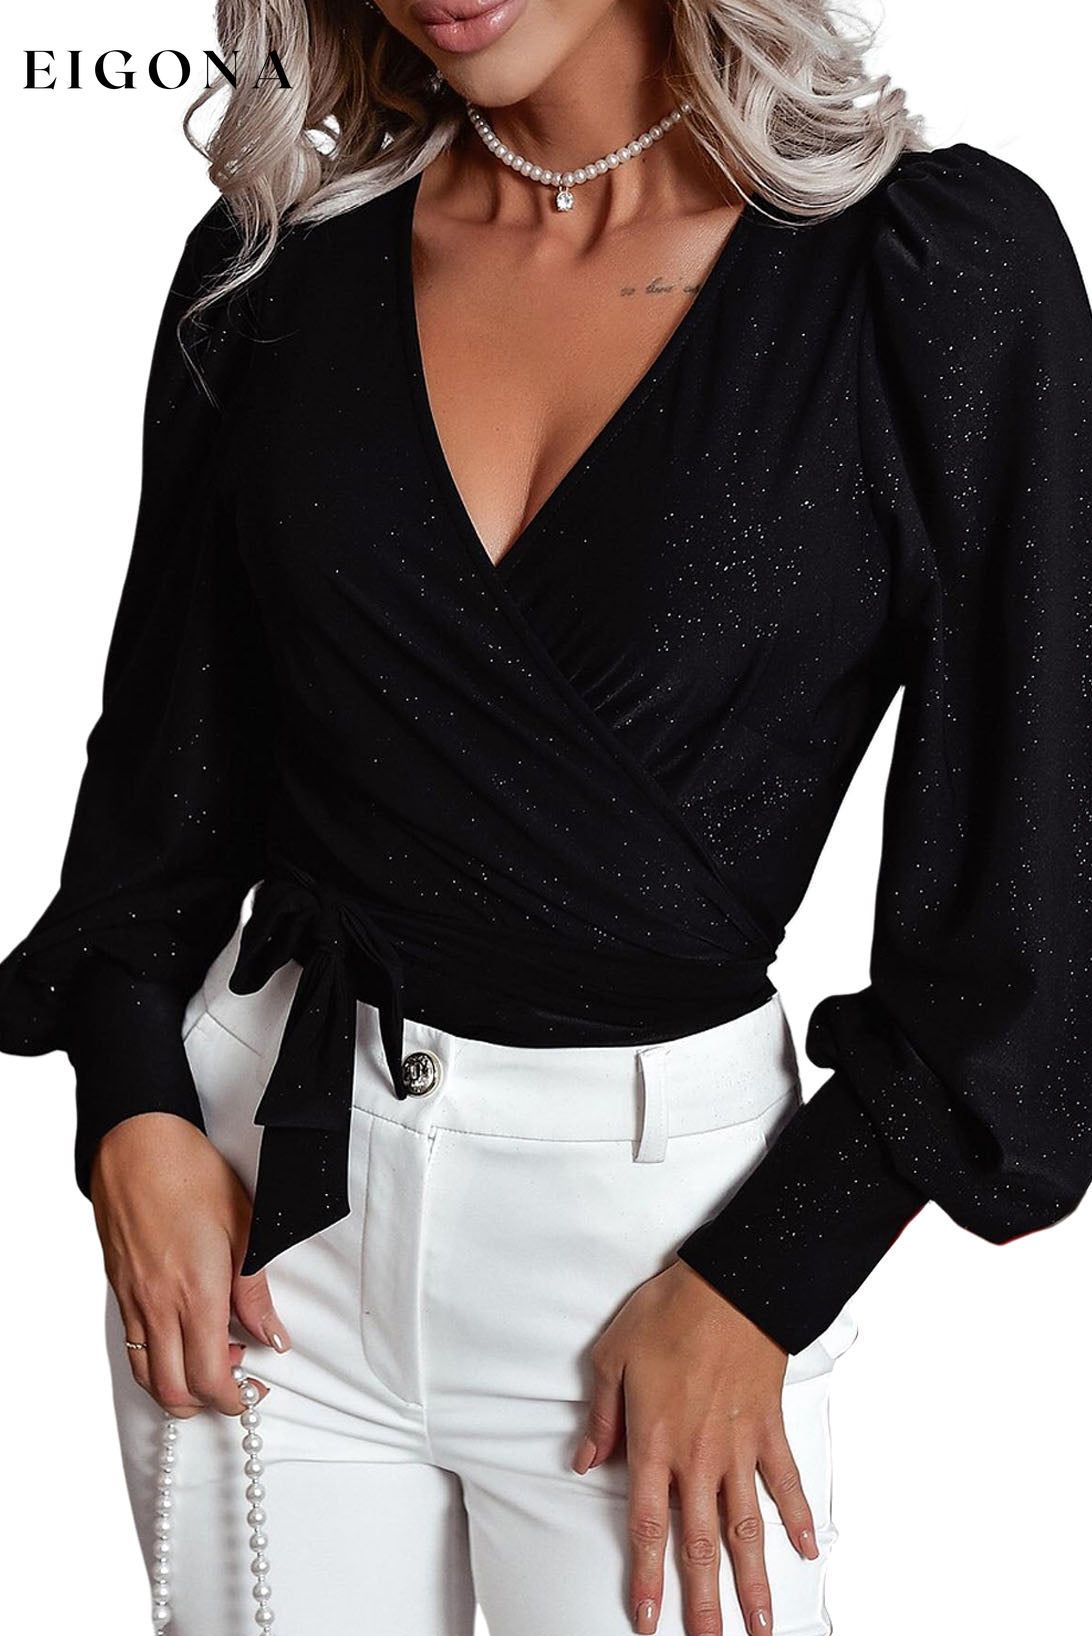 Black Glitter Wrap V Neck Tie Hem Puff Sleeve Blouse All In Stock clothes long sleeve top long sleeve tops Occasion Night Out Print Solid Color Style Elegant top tops